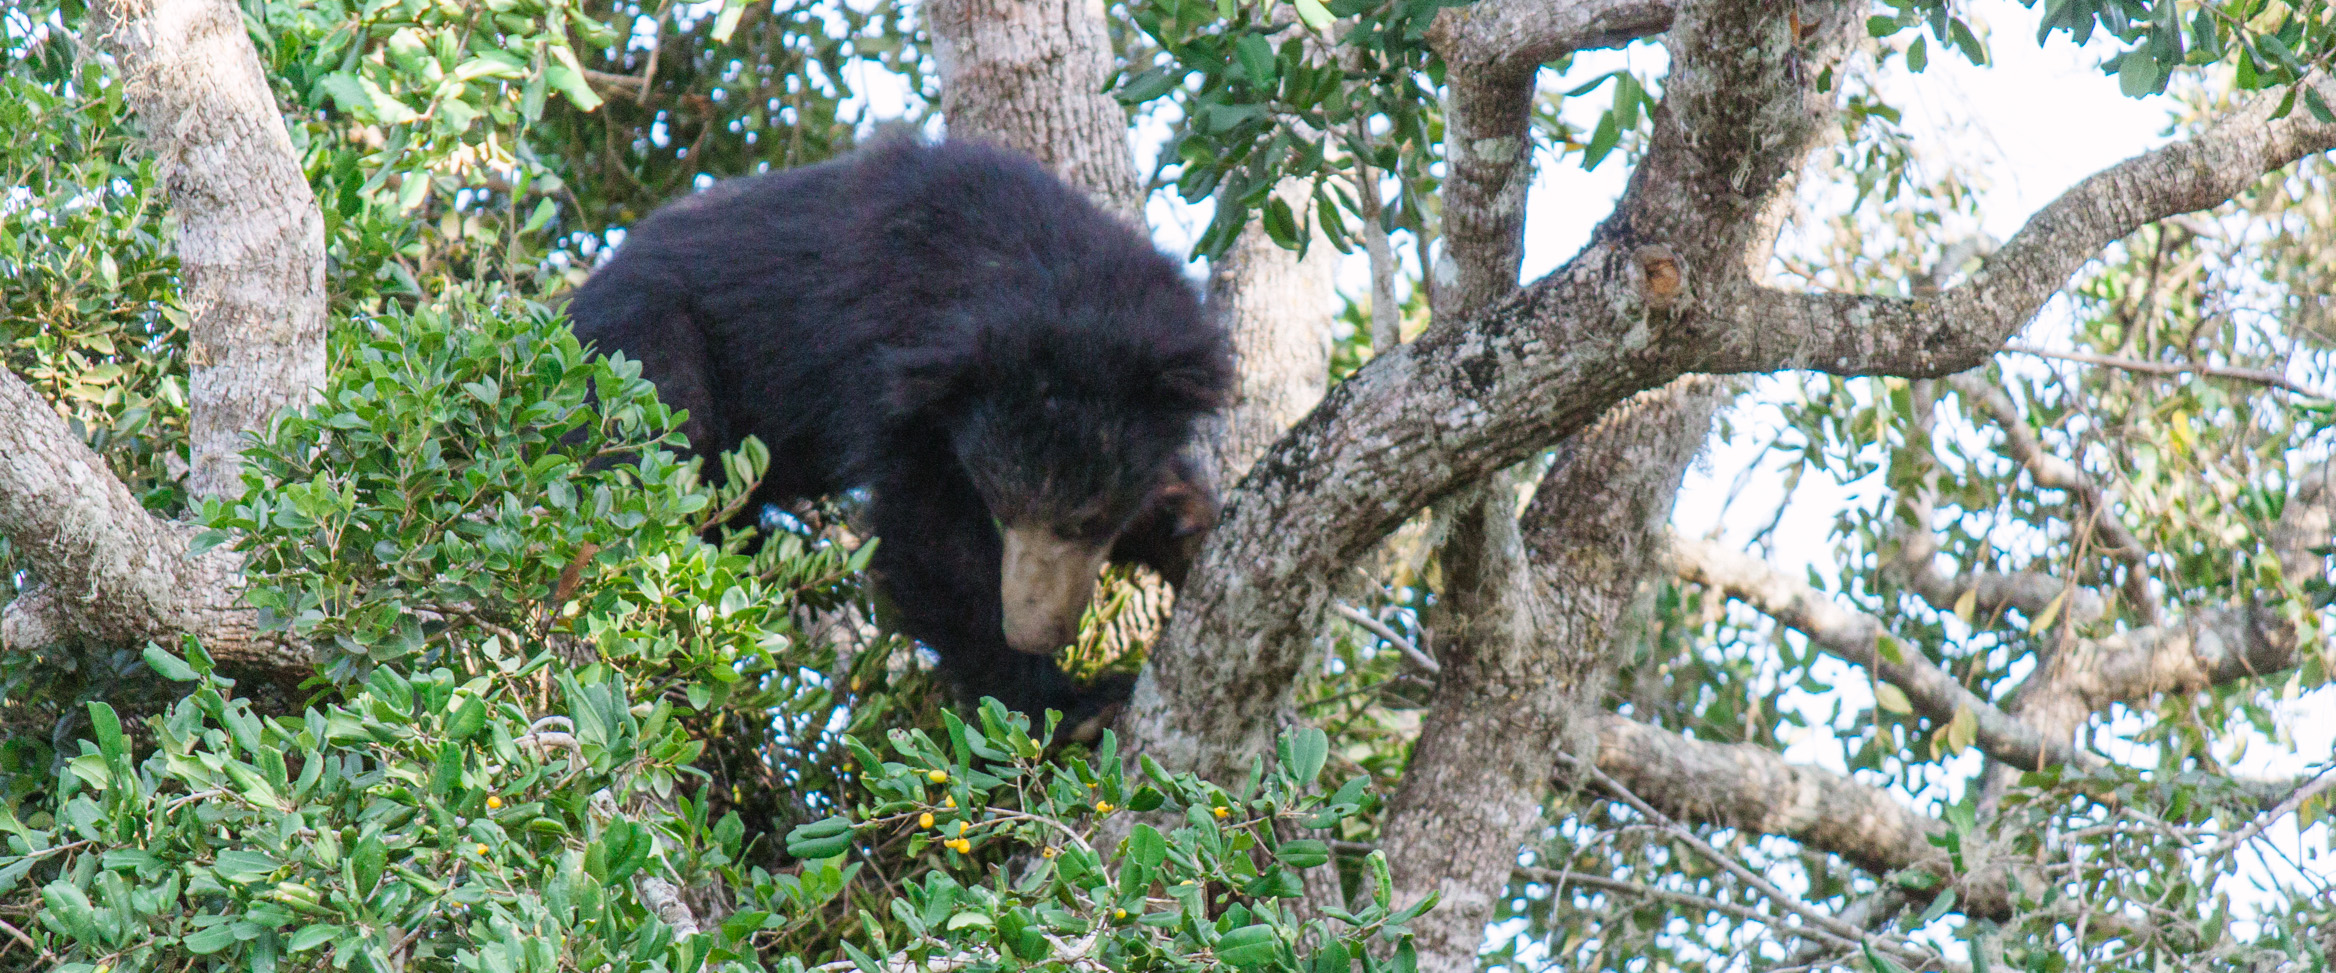 One of Five Sloth Bears Spotted at the Park